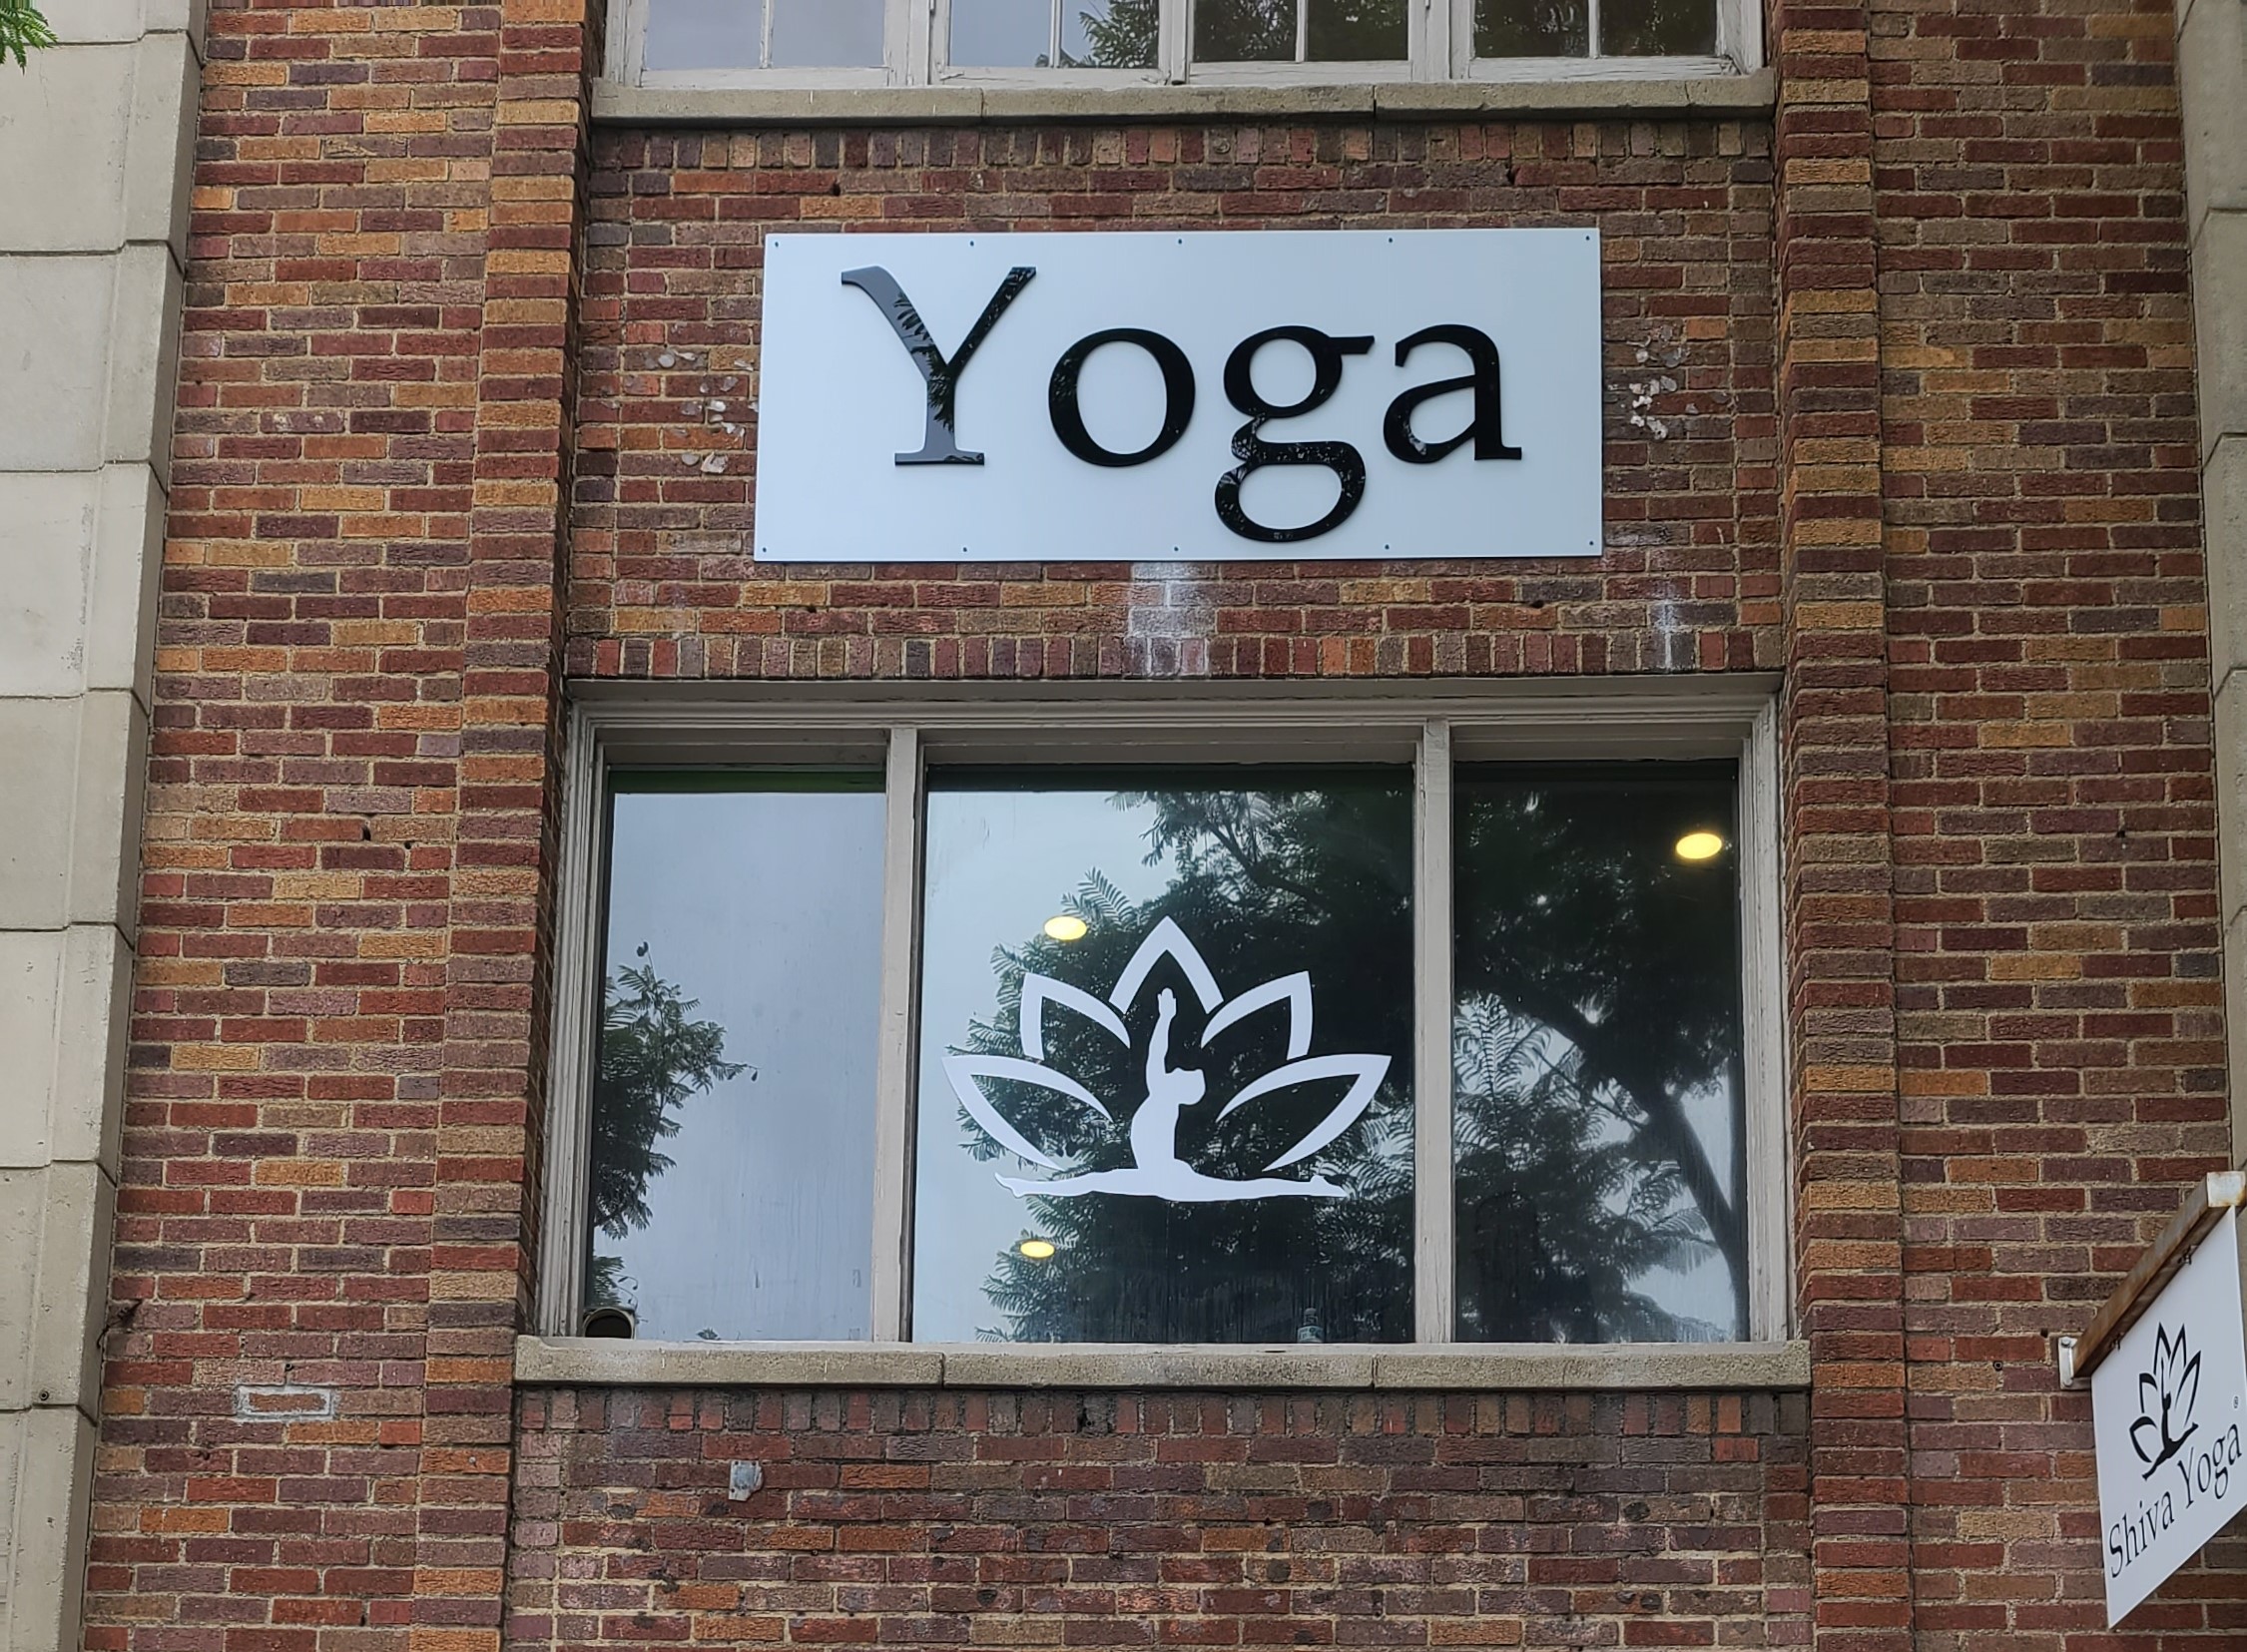 This is the studio sign for Shiva Yoga's West Hollywood establishment, composed of acrylic letters on a metal panel over their entrance.